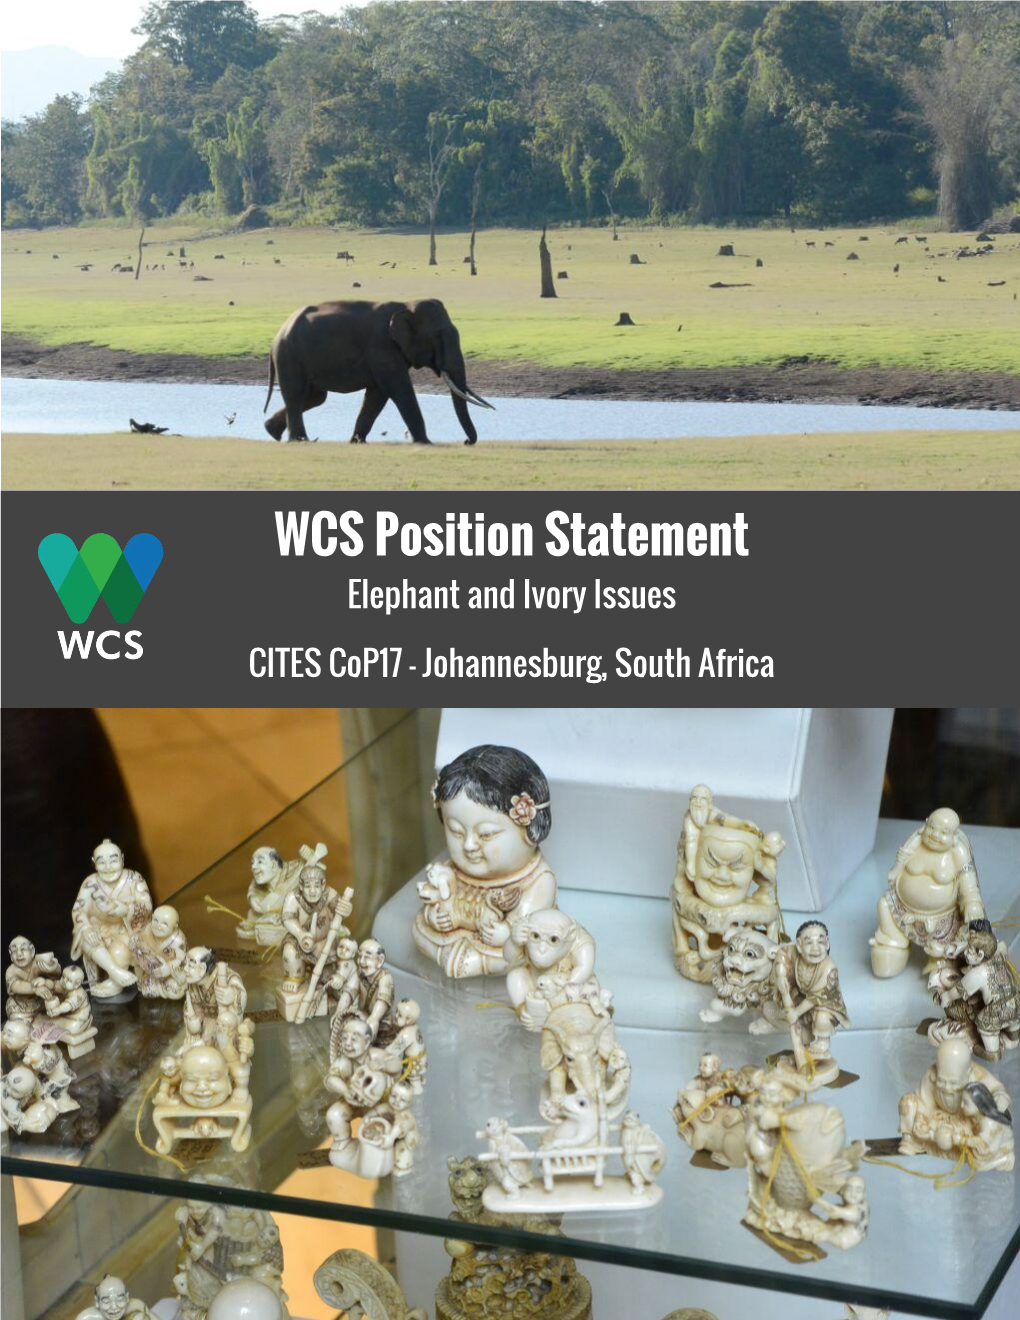 WCS Position Statement on Elephant and Ivory Issues